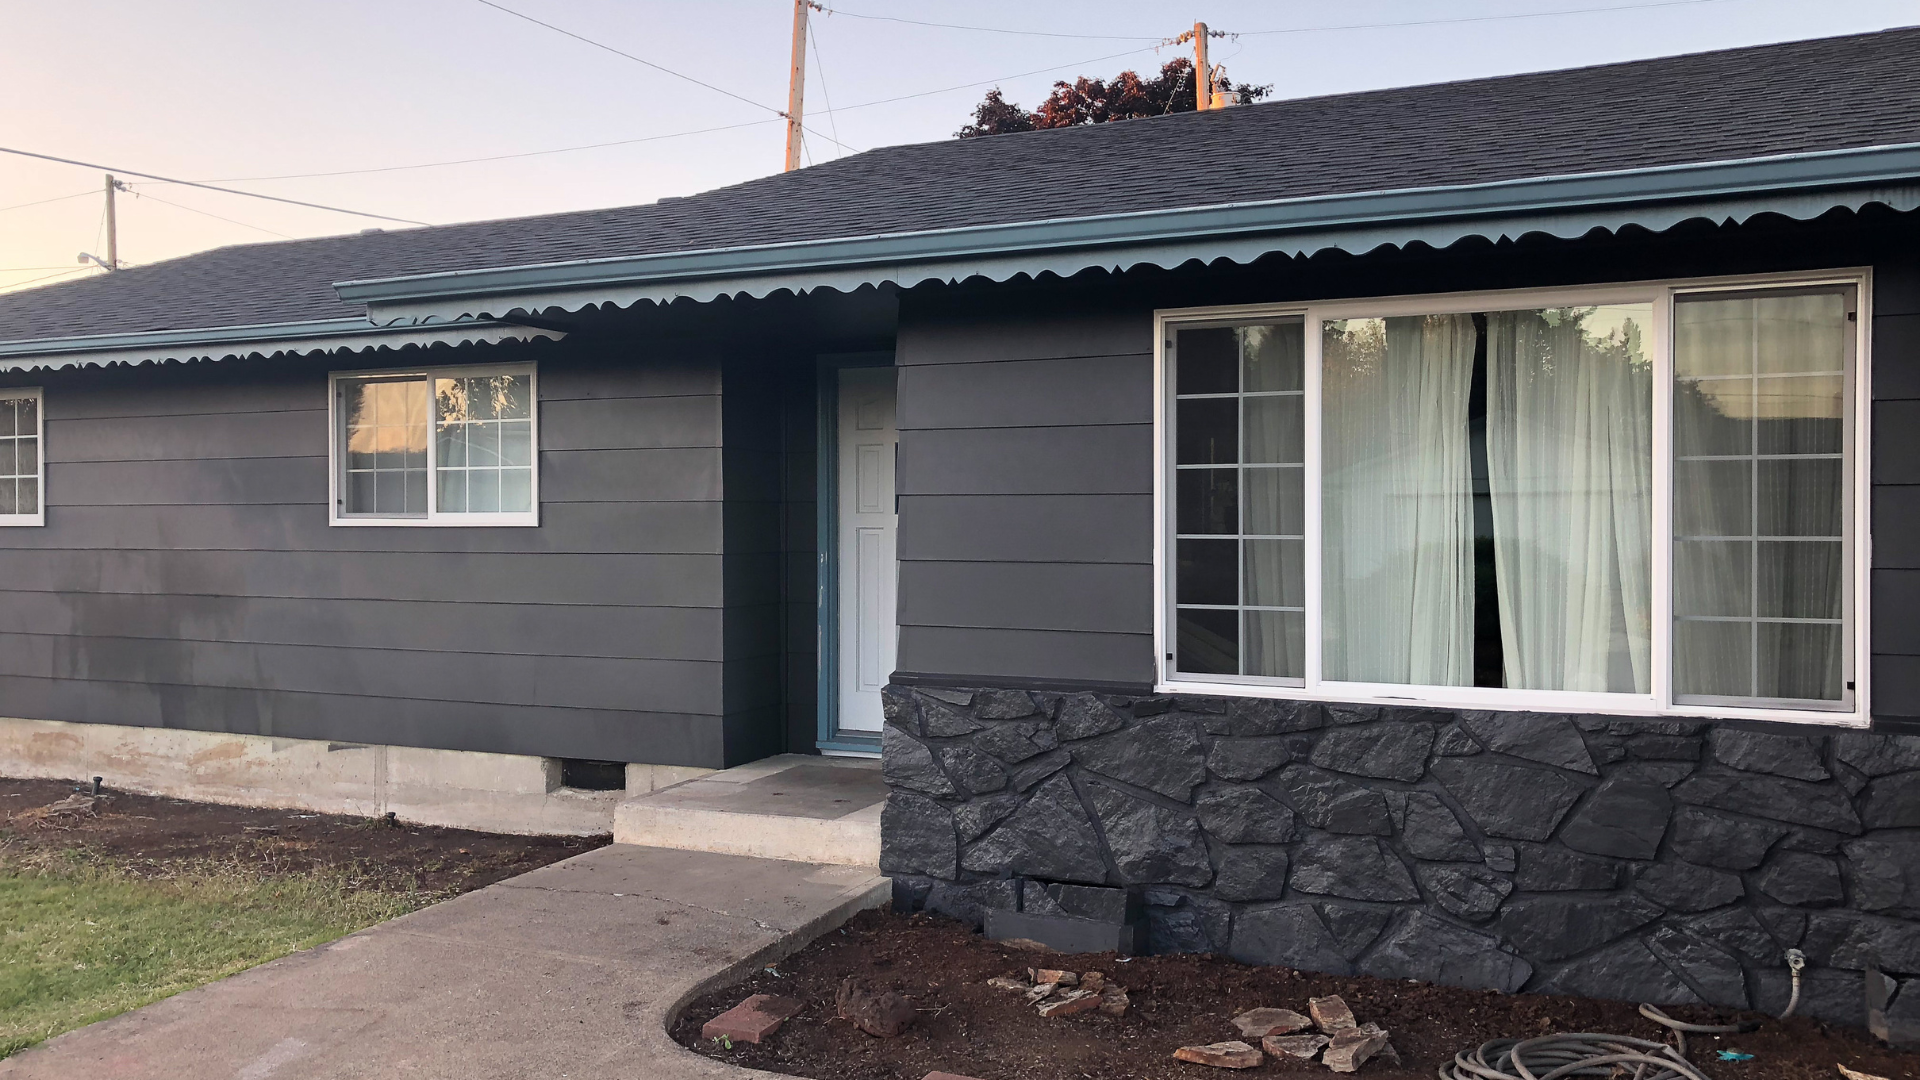 Submarine Gray exterior paint color